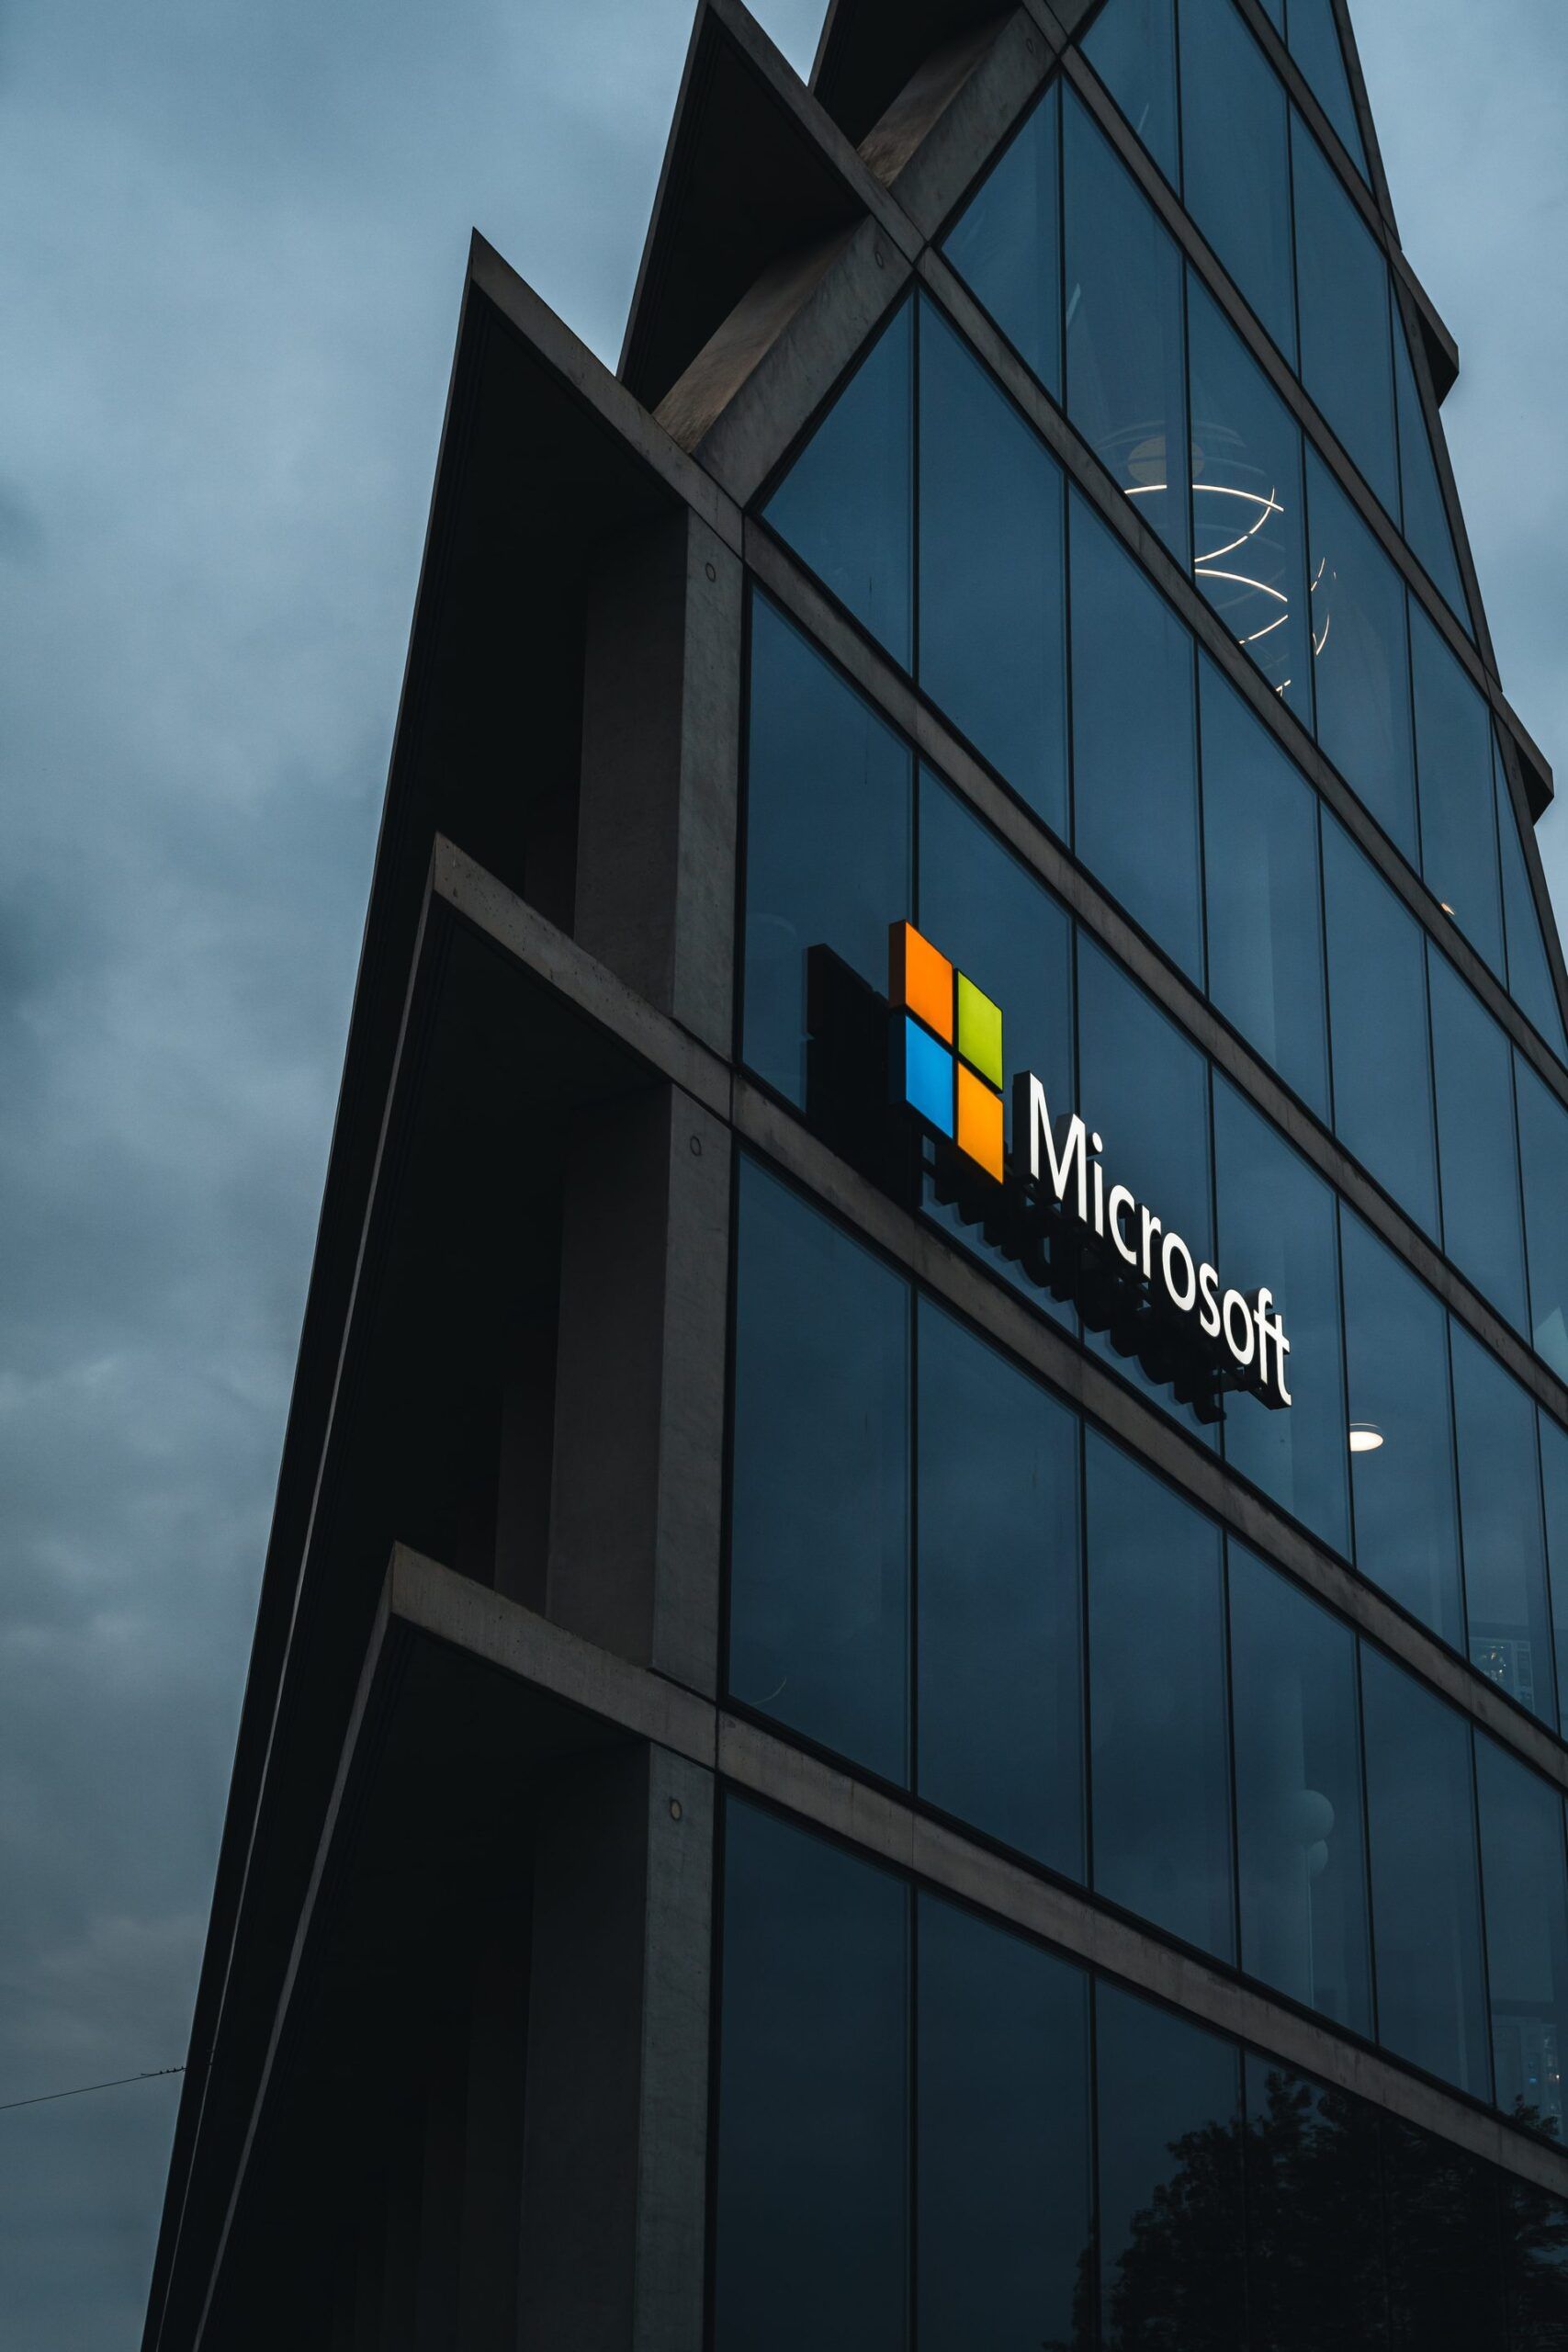 Microsoft's "special event" set on September 21